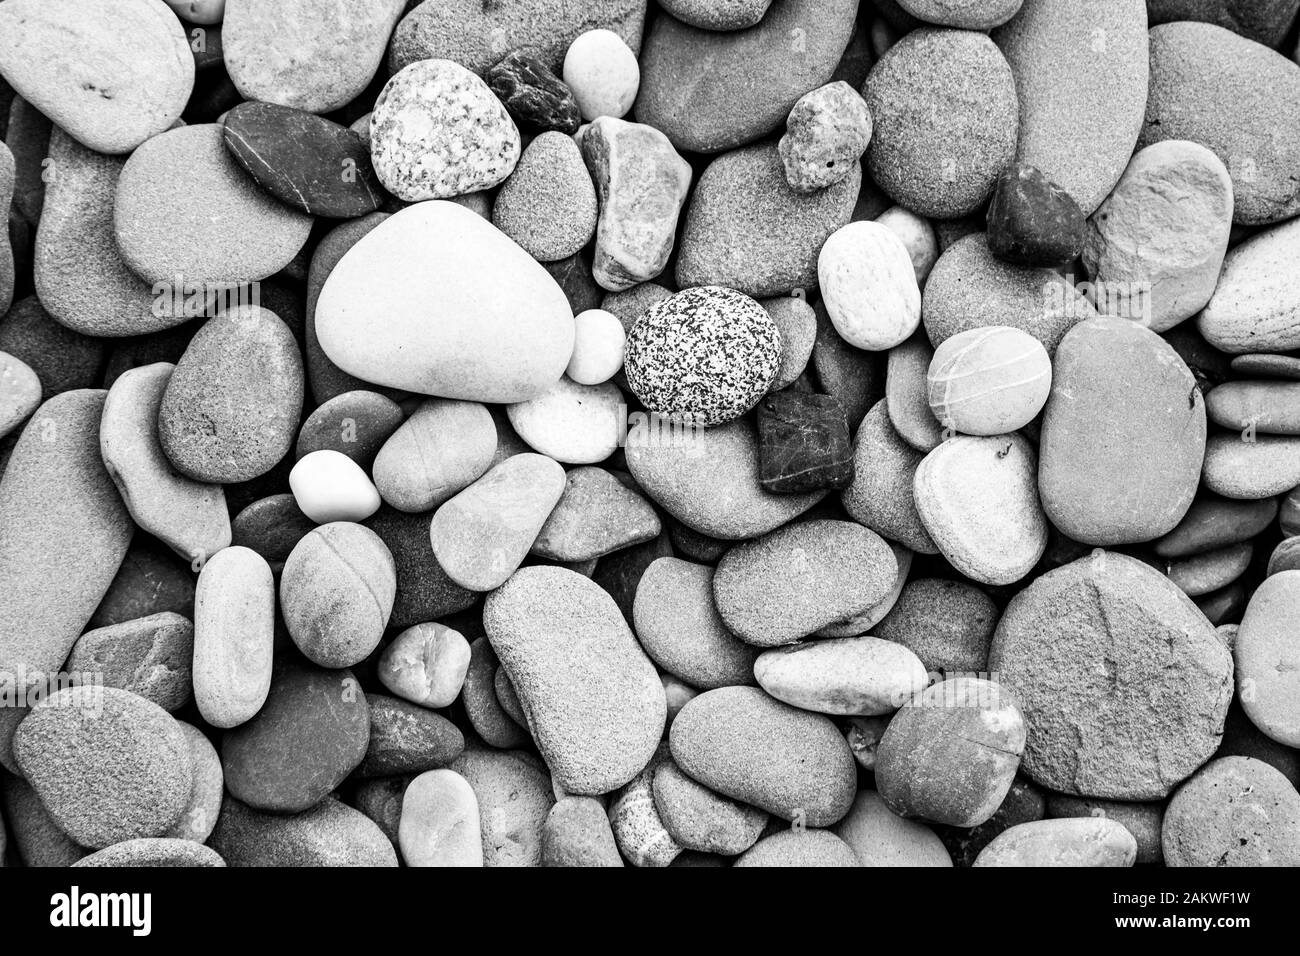 Black and white rendering of smooth and flat river rocks great for background, featuring contrasting values, textures, and shapes Stock Photo